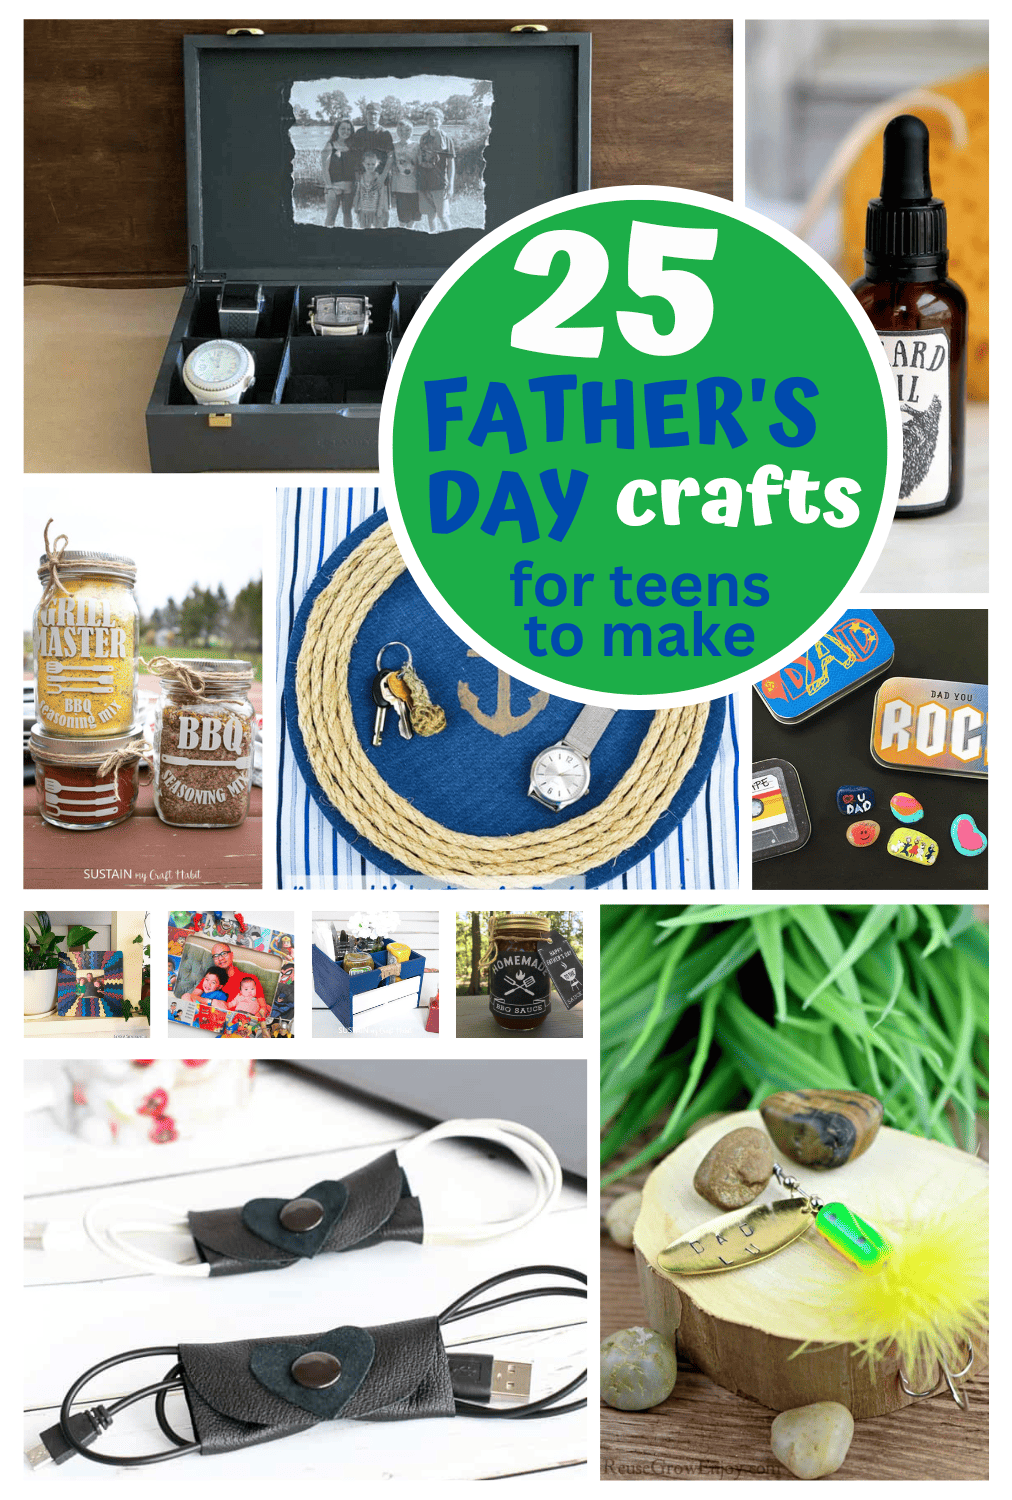 25 Father’s Day Crafts for Teens to Make